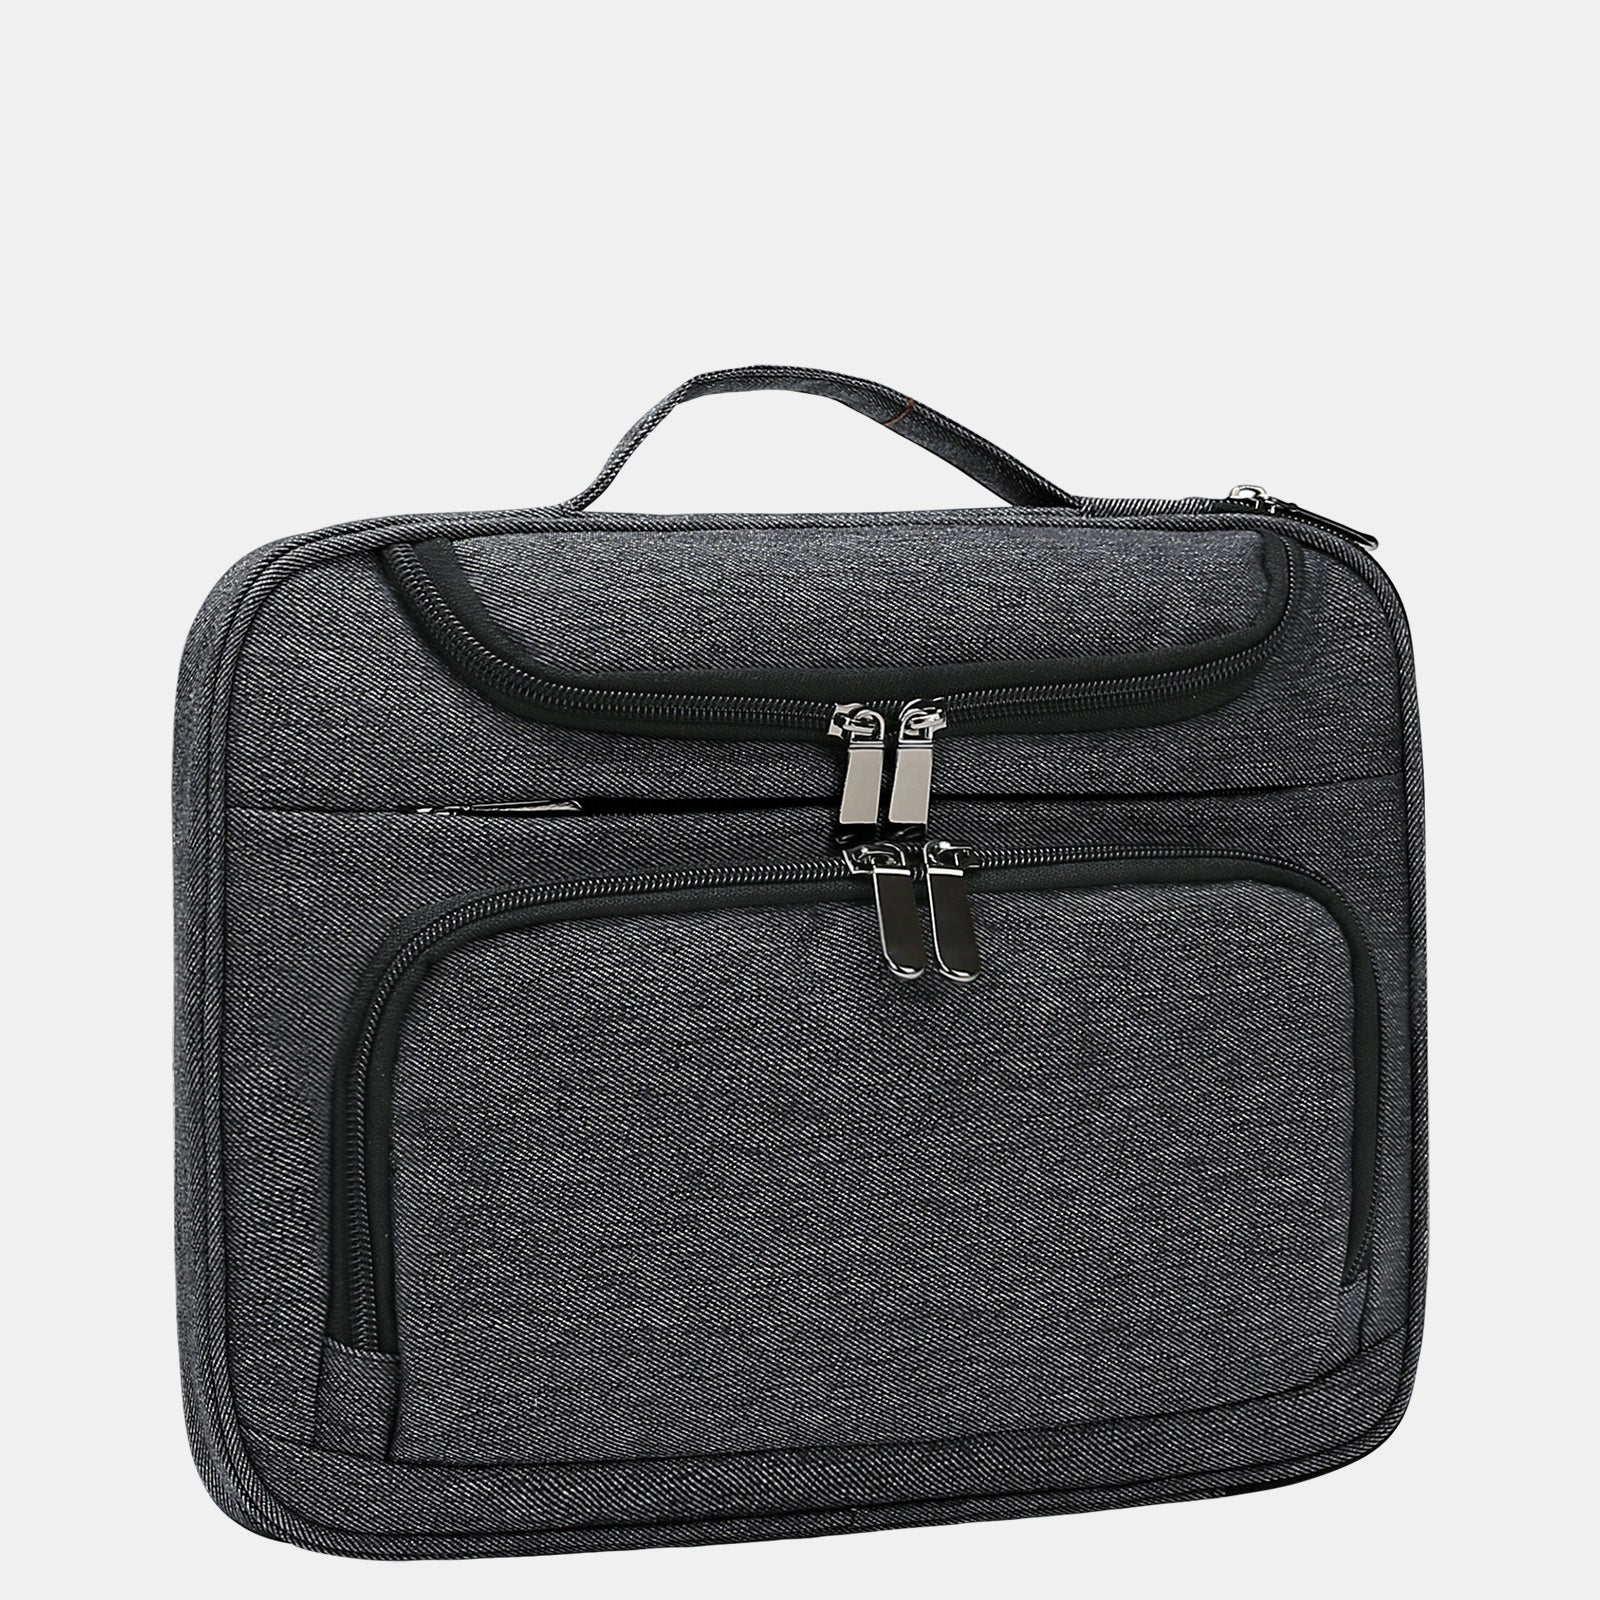 Bertasche 11 inch Tablet Sleeve Bag for iPad Carrying Briefcase